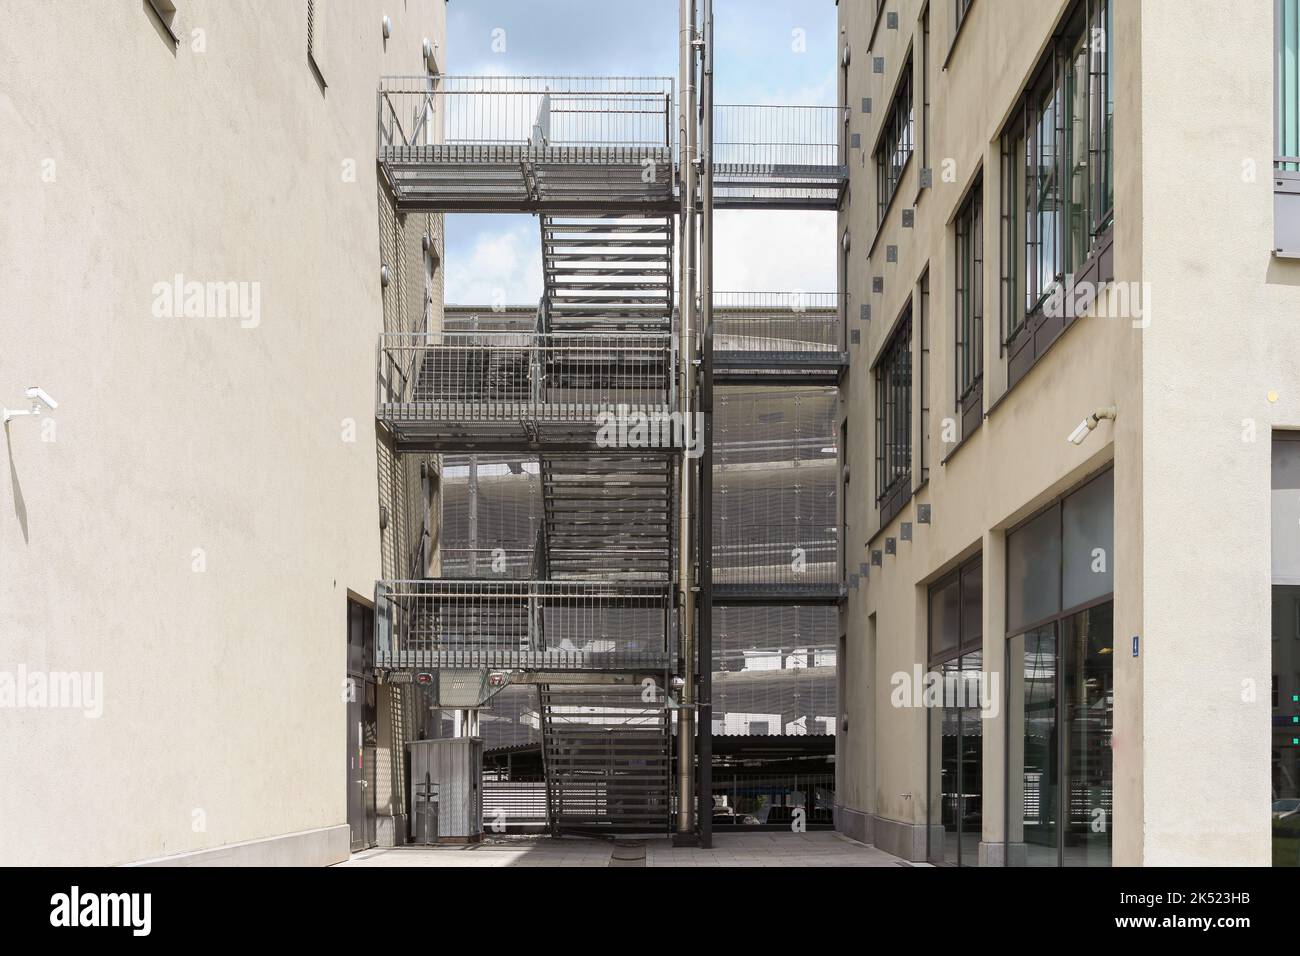 Outdoor stairs between two houses at a parking garage with stores - landscape format Stock Photo